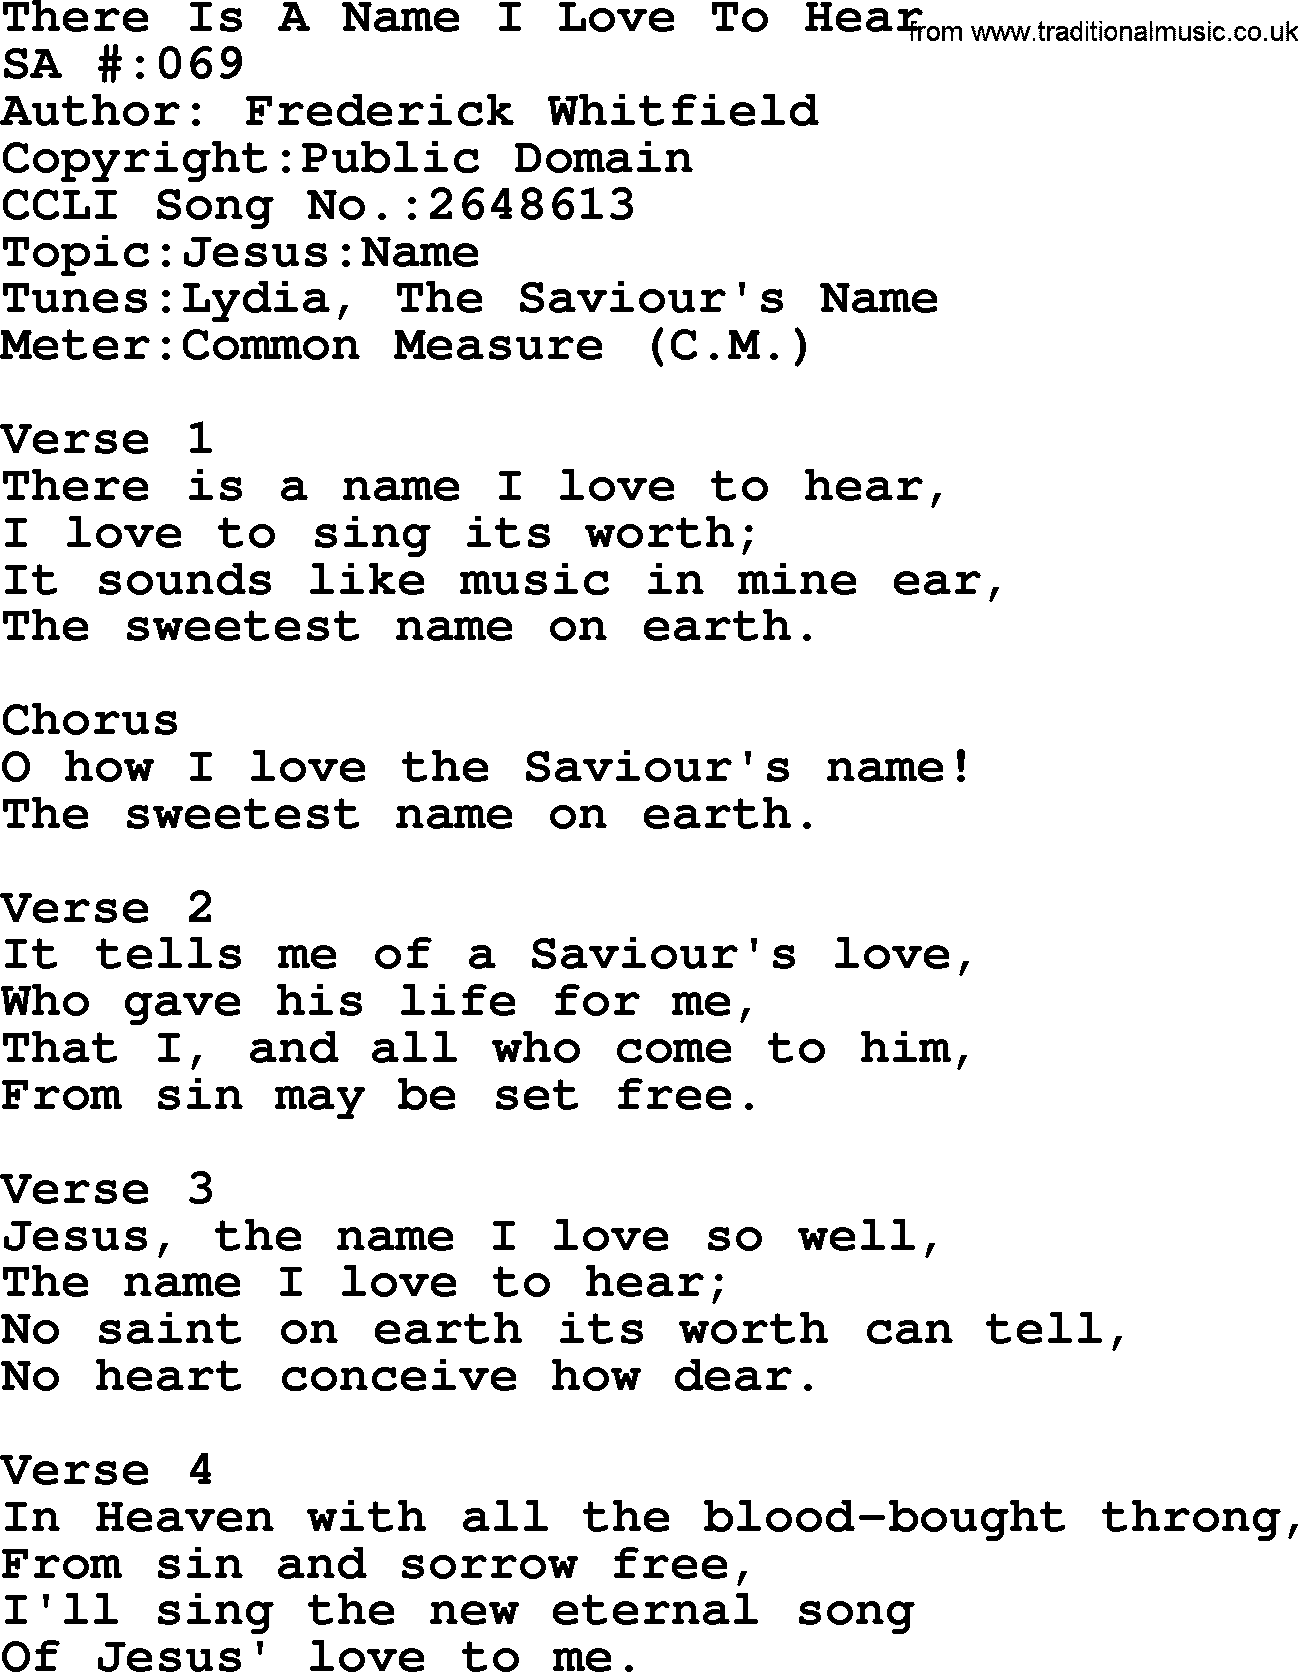 Salvation Army Hymnal, title: There Is A Name I Love To Hear, with lyrics and PDF,